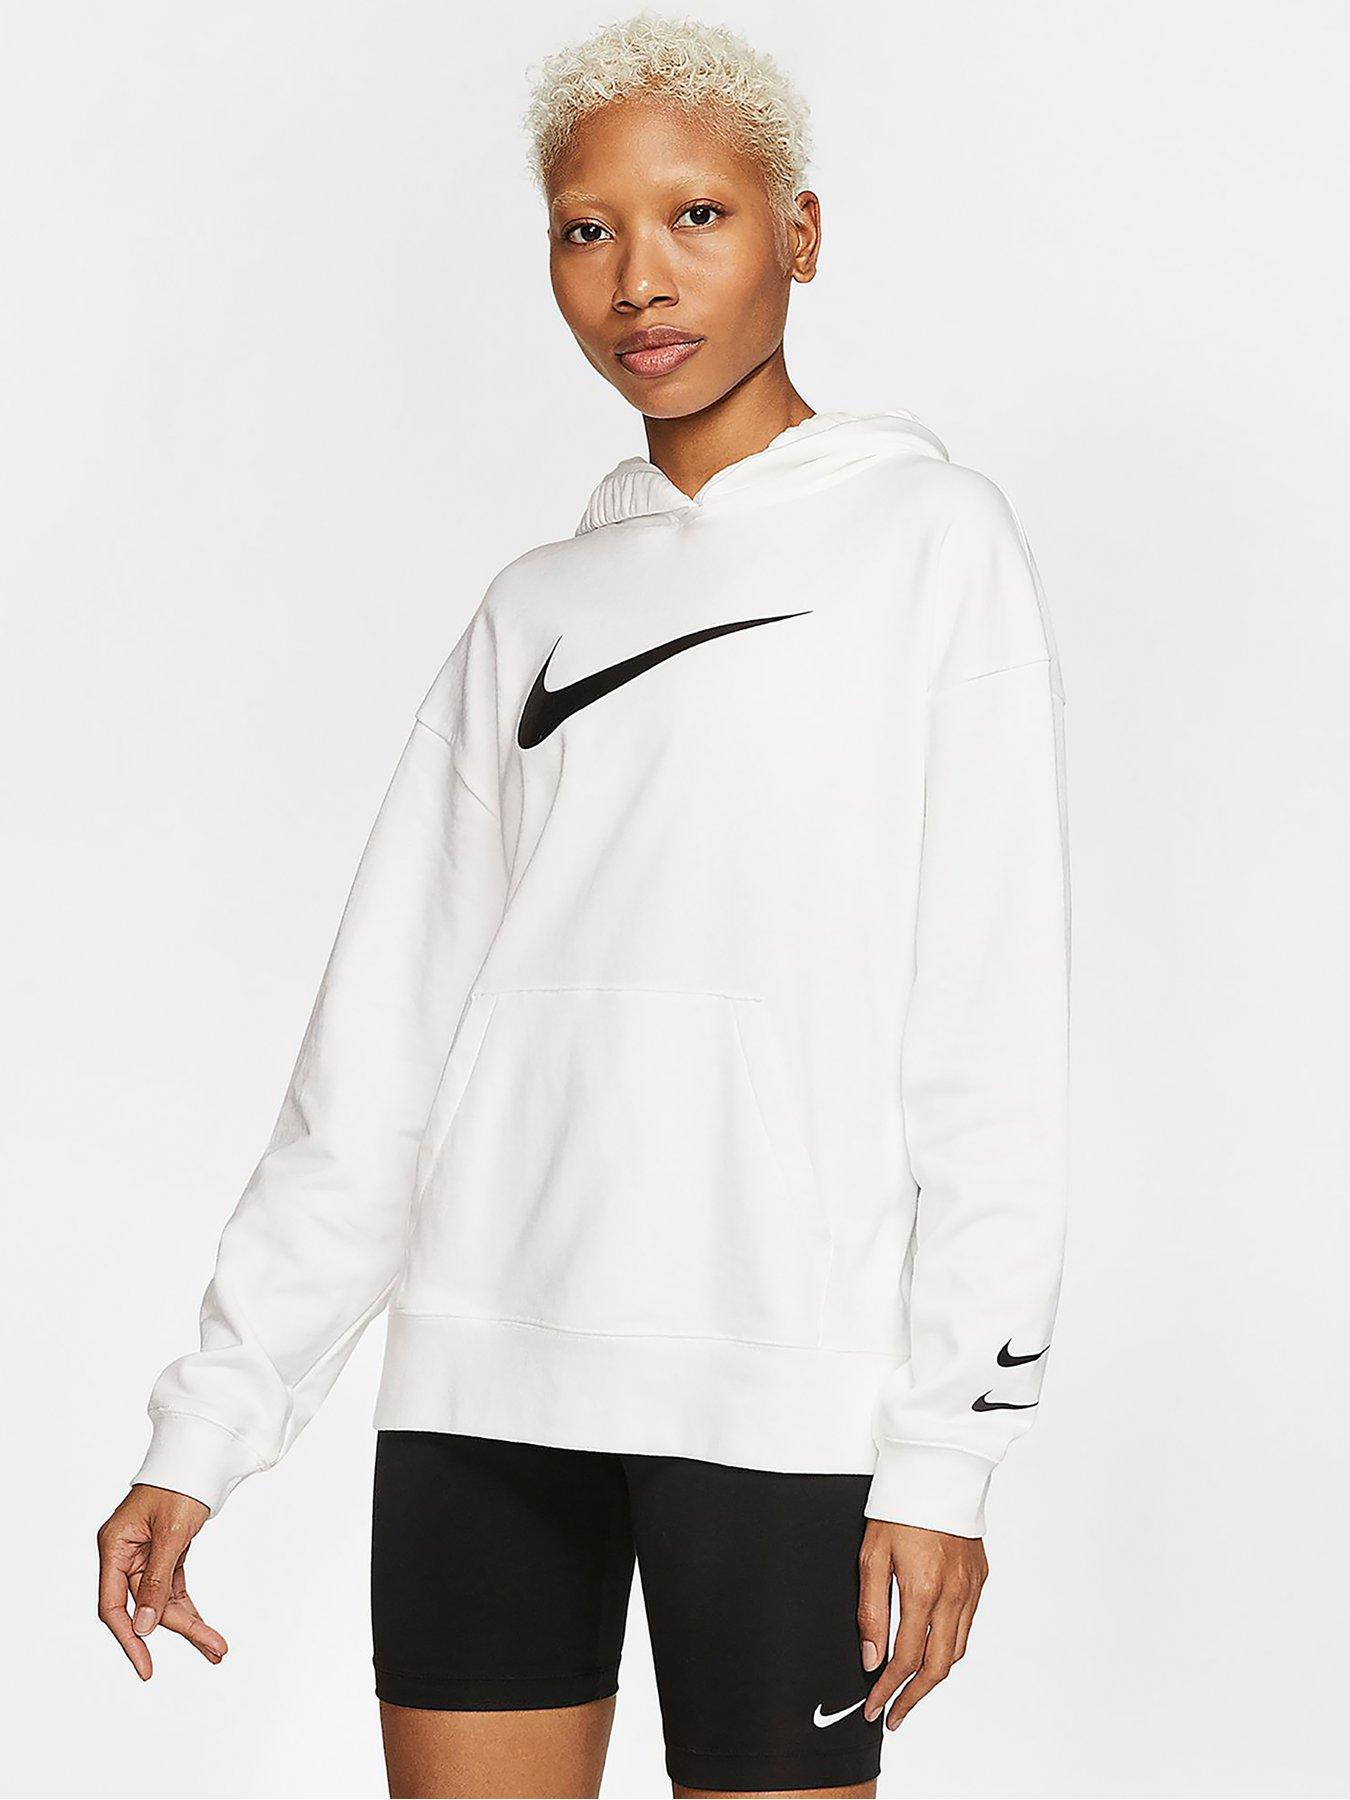 grey nike jumper with white tick